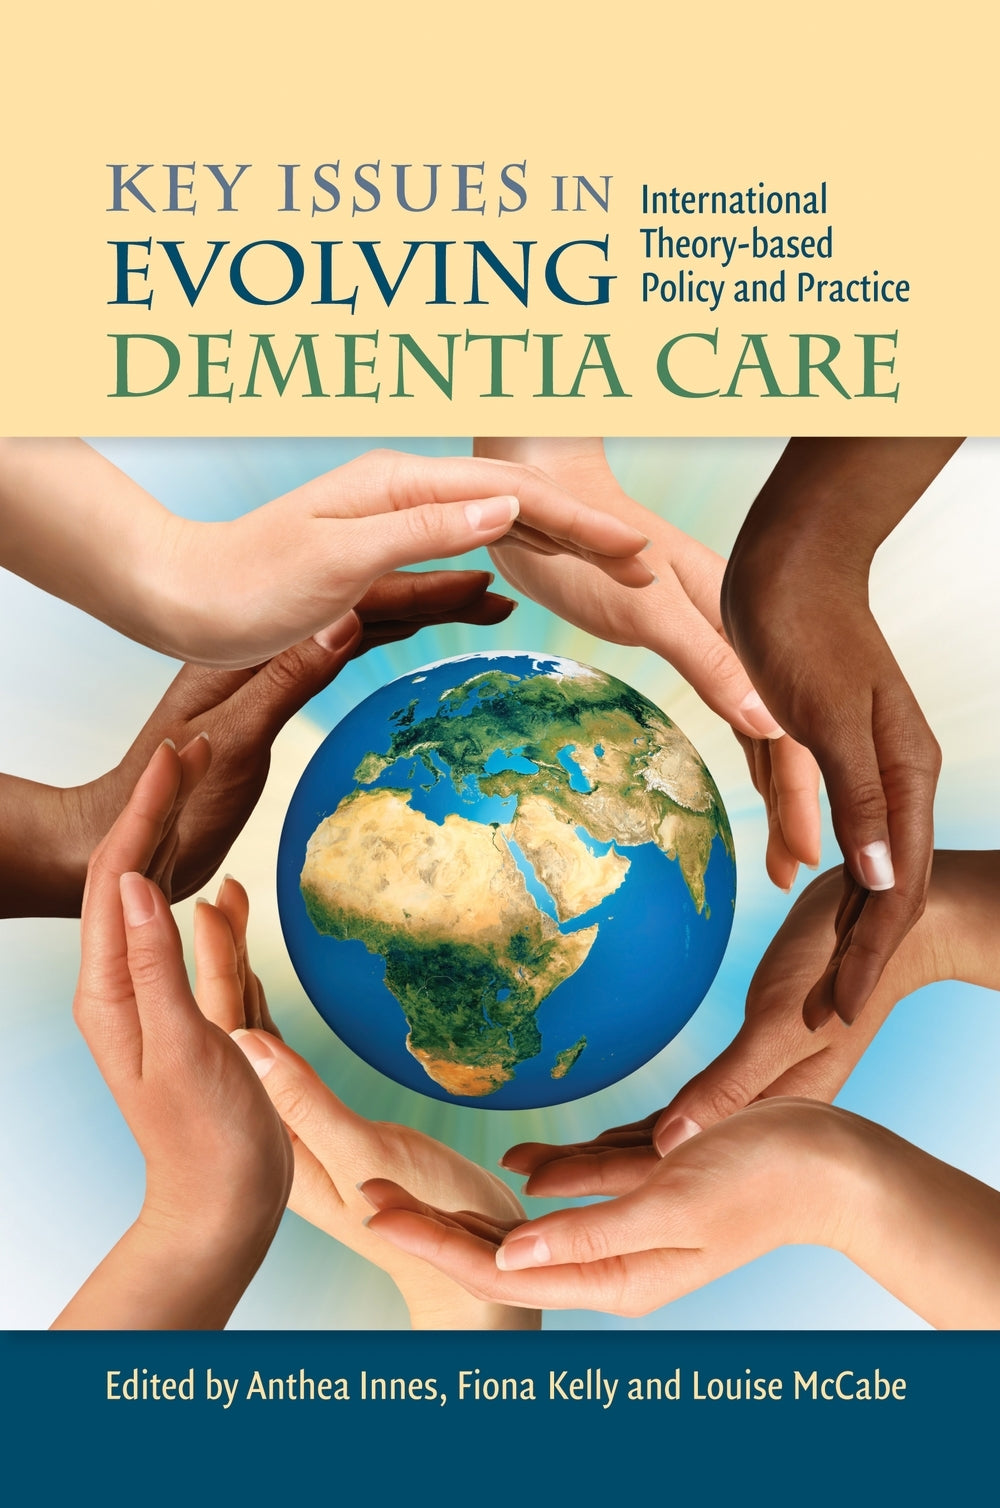 Key Issues in Evolving Dementia Care by Louise McCabe, Anthea Innes, Fiona Kelly, Louise McCabe, June Andrews, Anthea Innes, Fiona Kelly